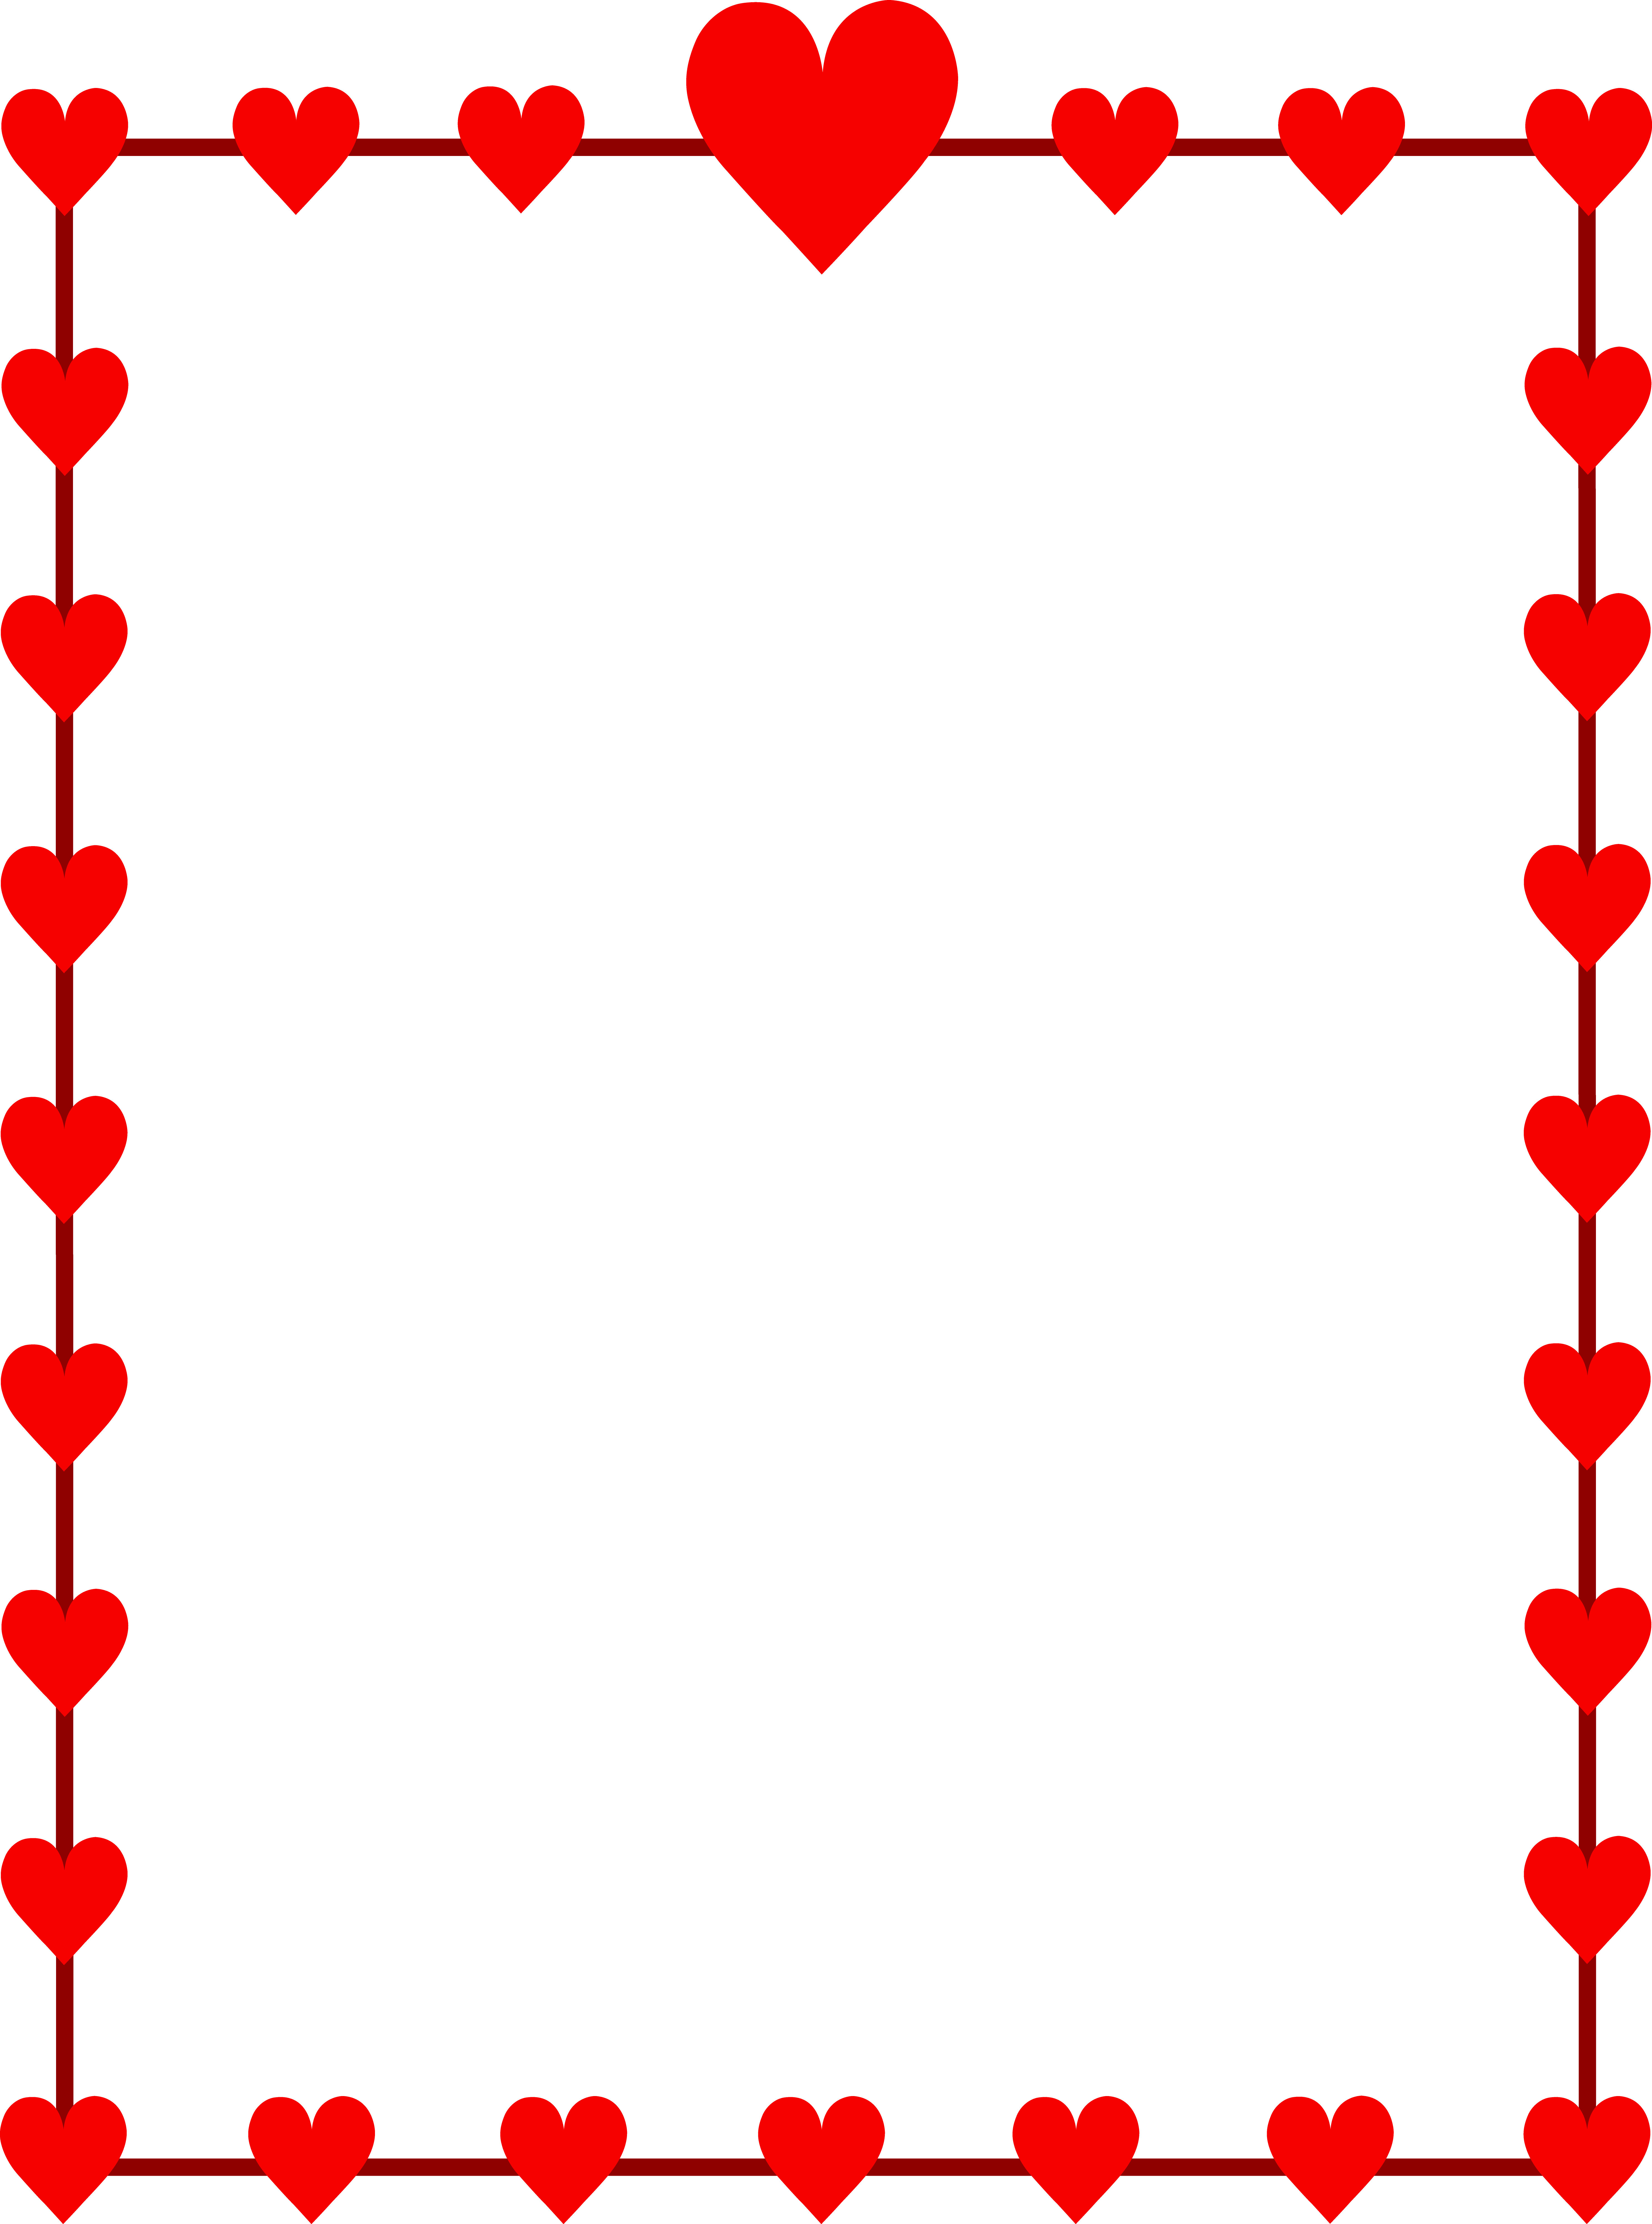 Free Heart Border For Word Download Free Heart Border For Word Png 